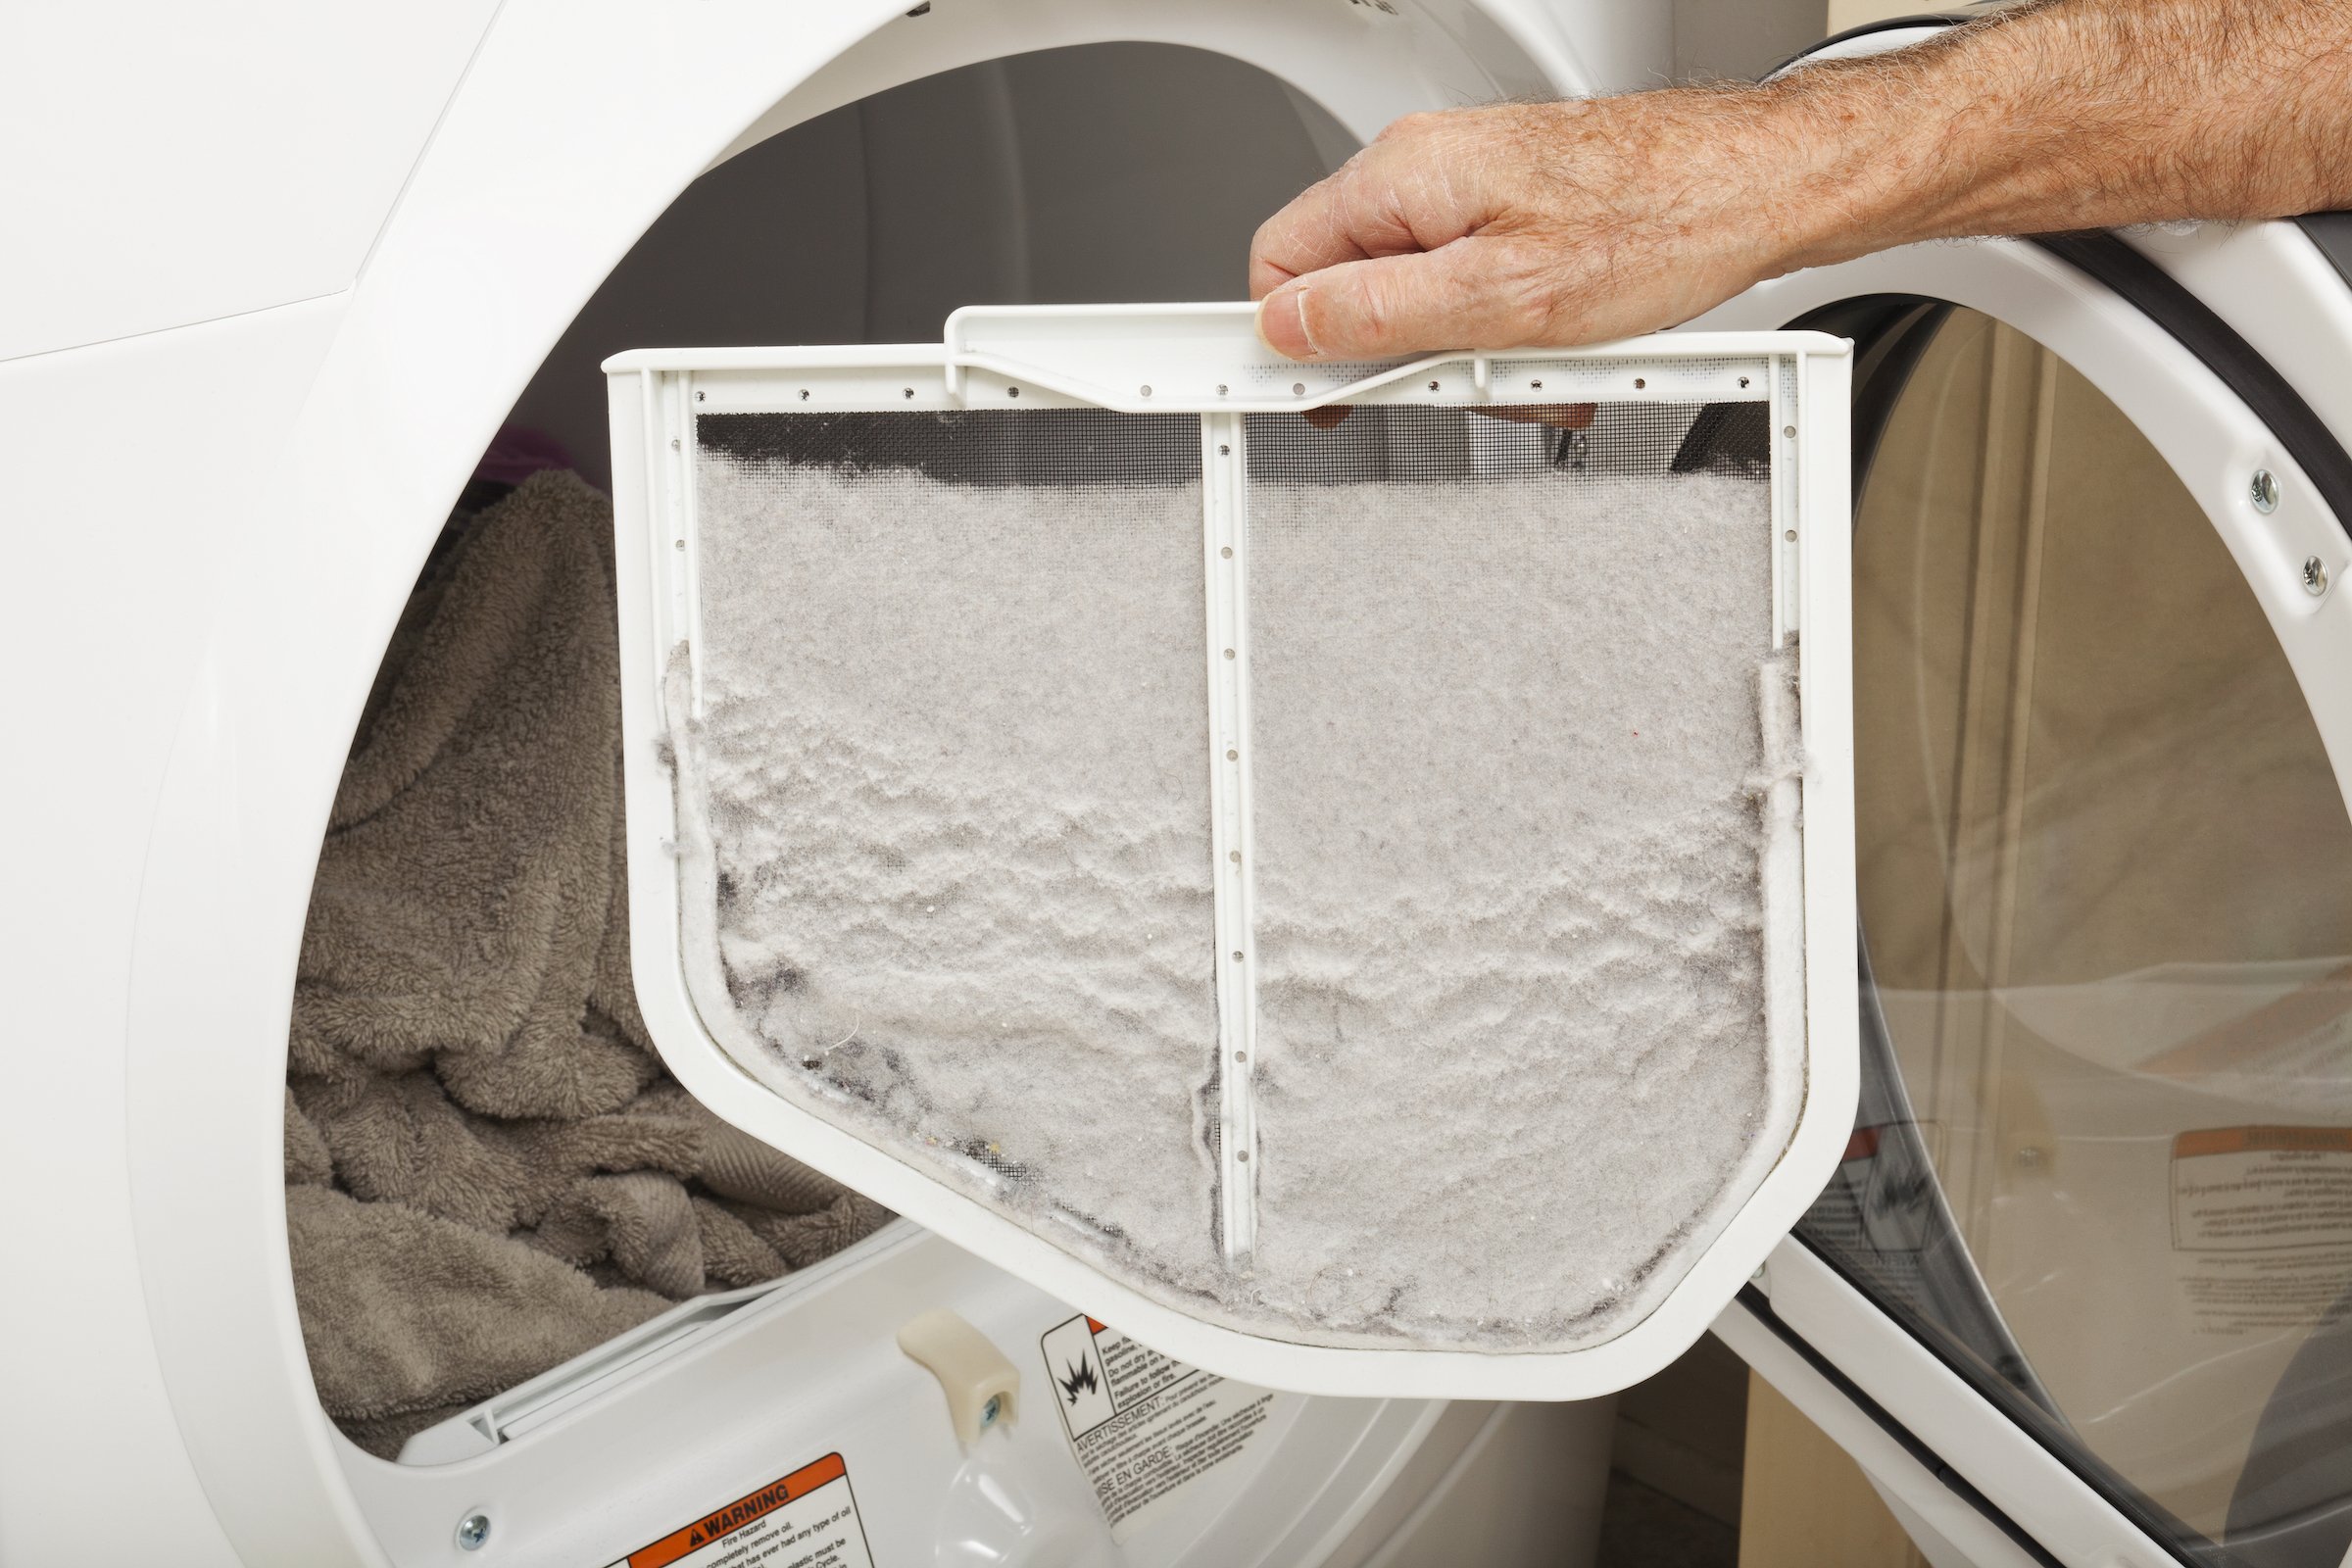 Home appliance maintenance tips for your dryer